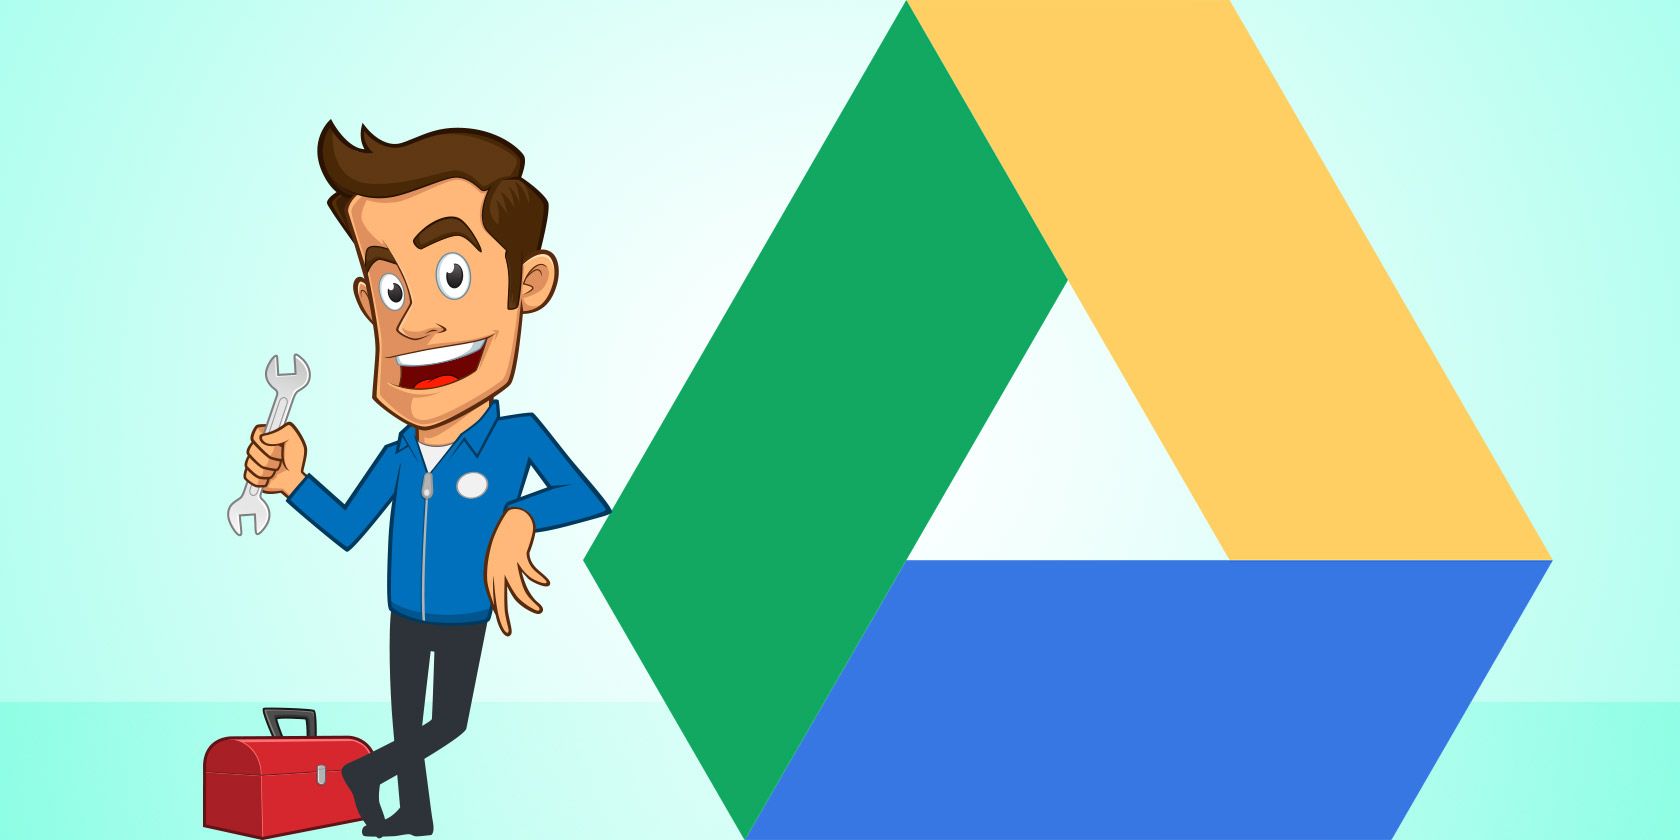 10 Common Google Drive Issues (And How to Solve Them)